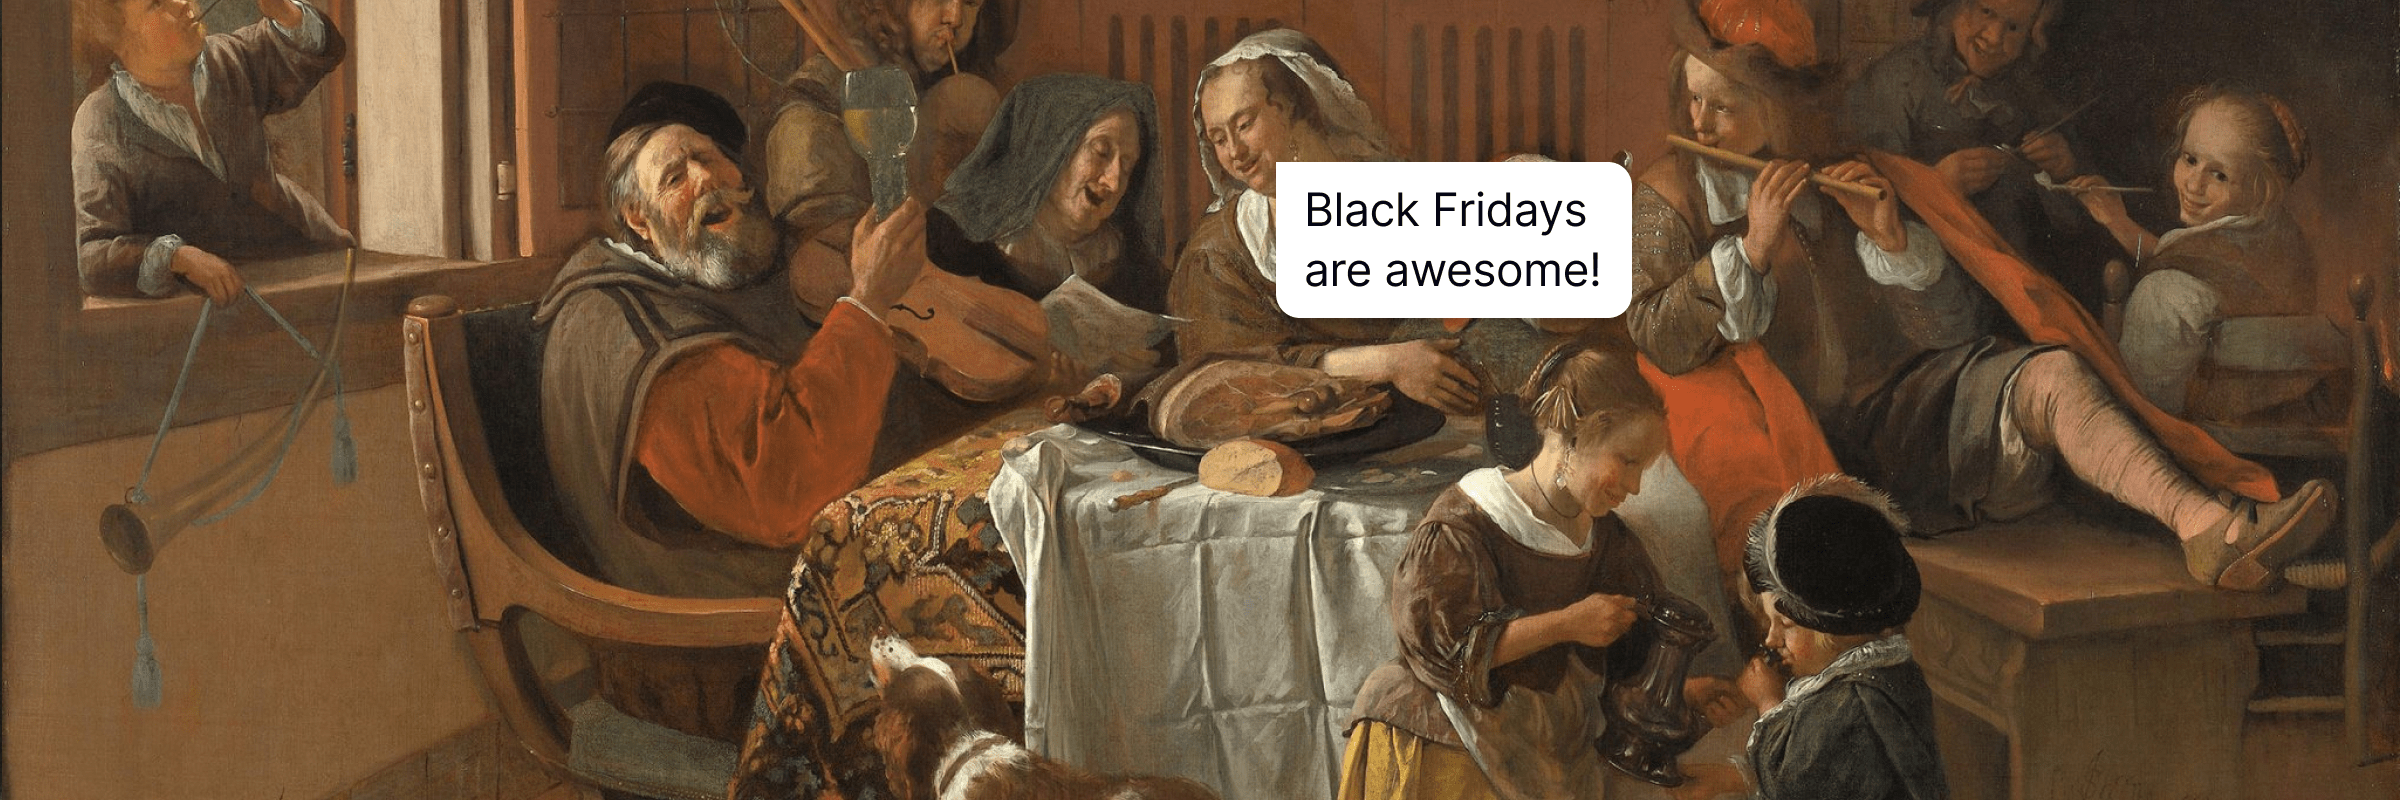 47 Black Friday Quotes and Slogans to Drive Record Sales (and How to Use Them)